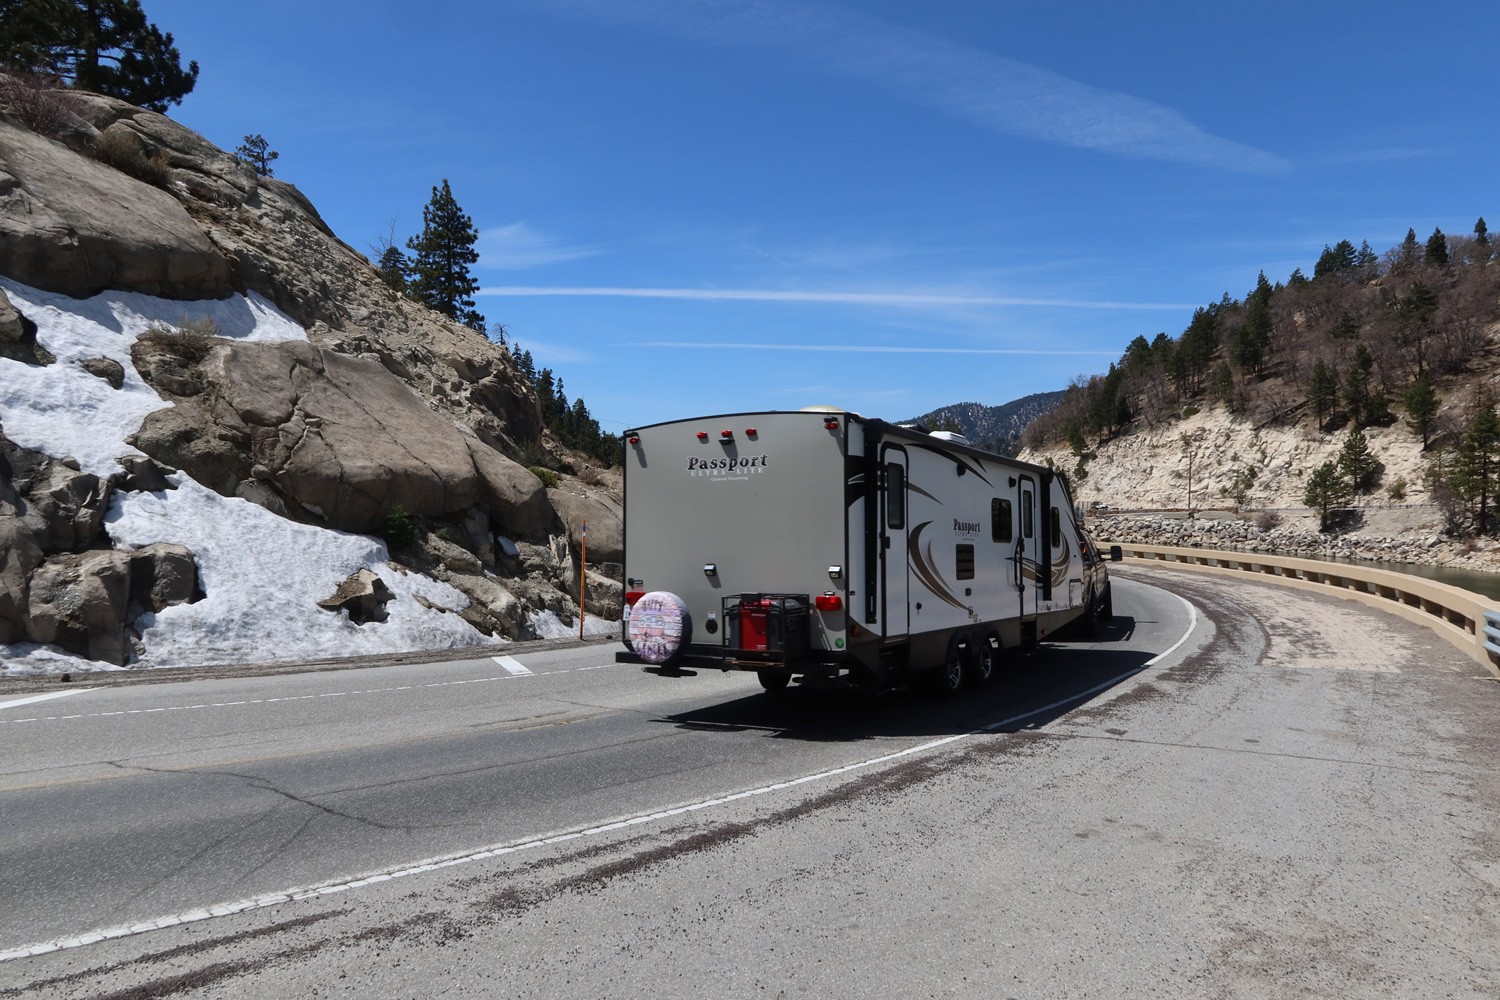 A Fifth 5th Wheel Recreational travel Trailer on a Mountain Road Looking for Adventure and a Place to camp